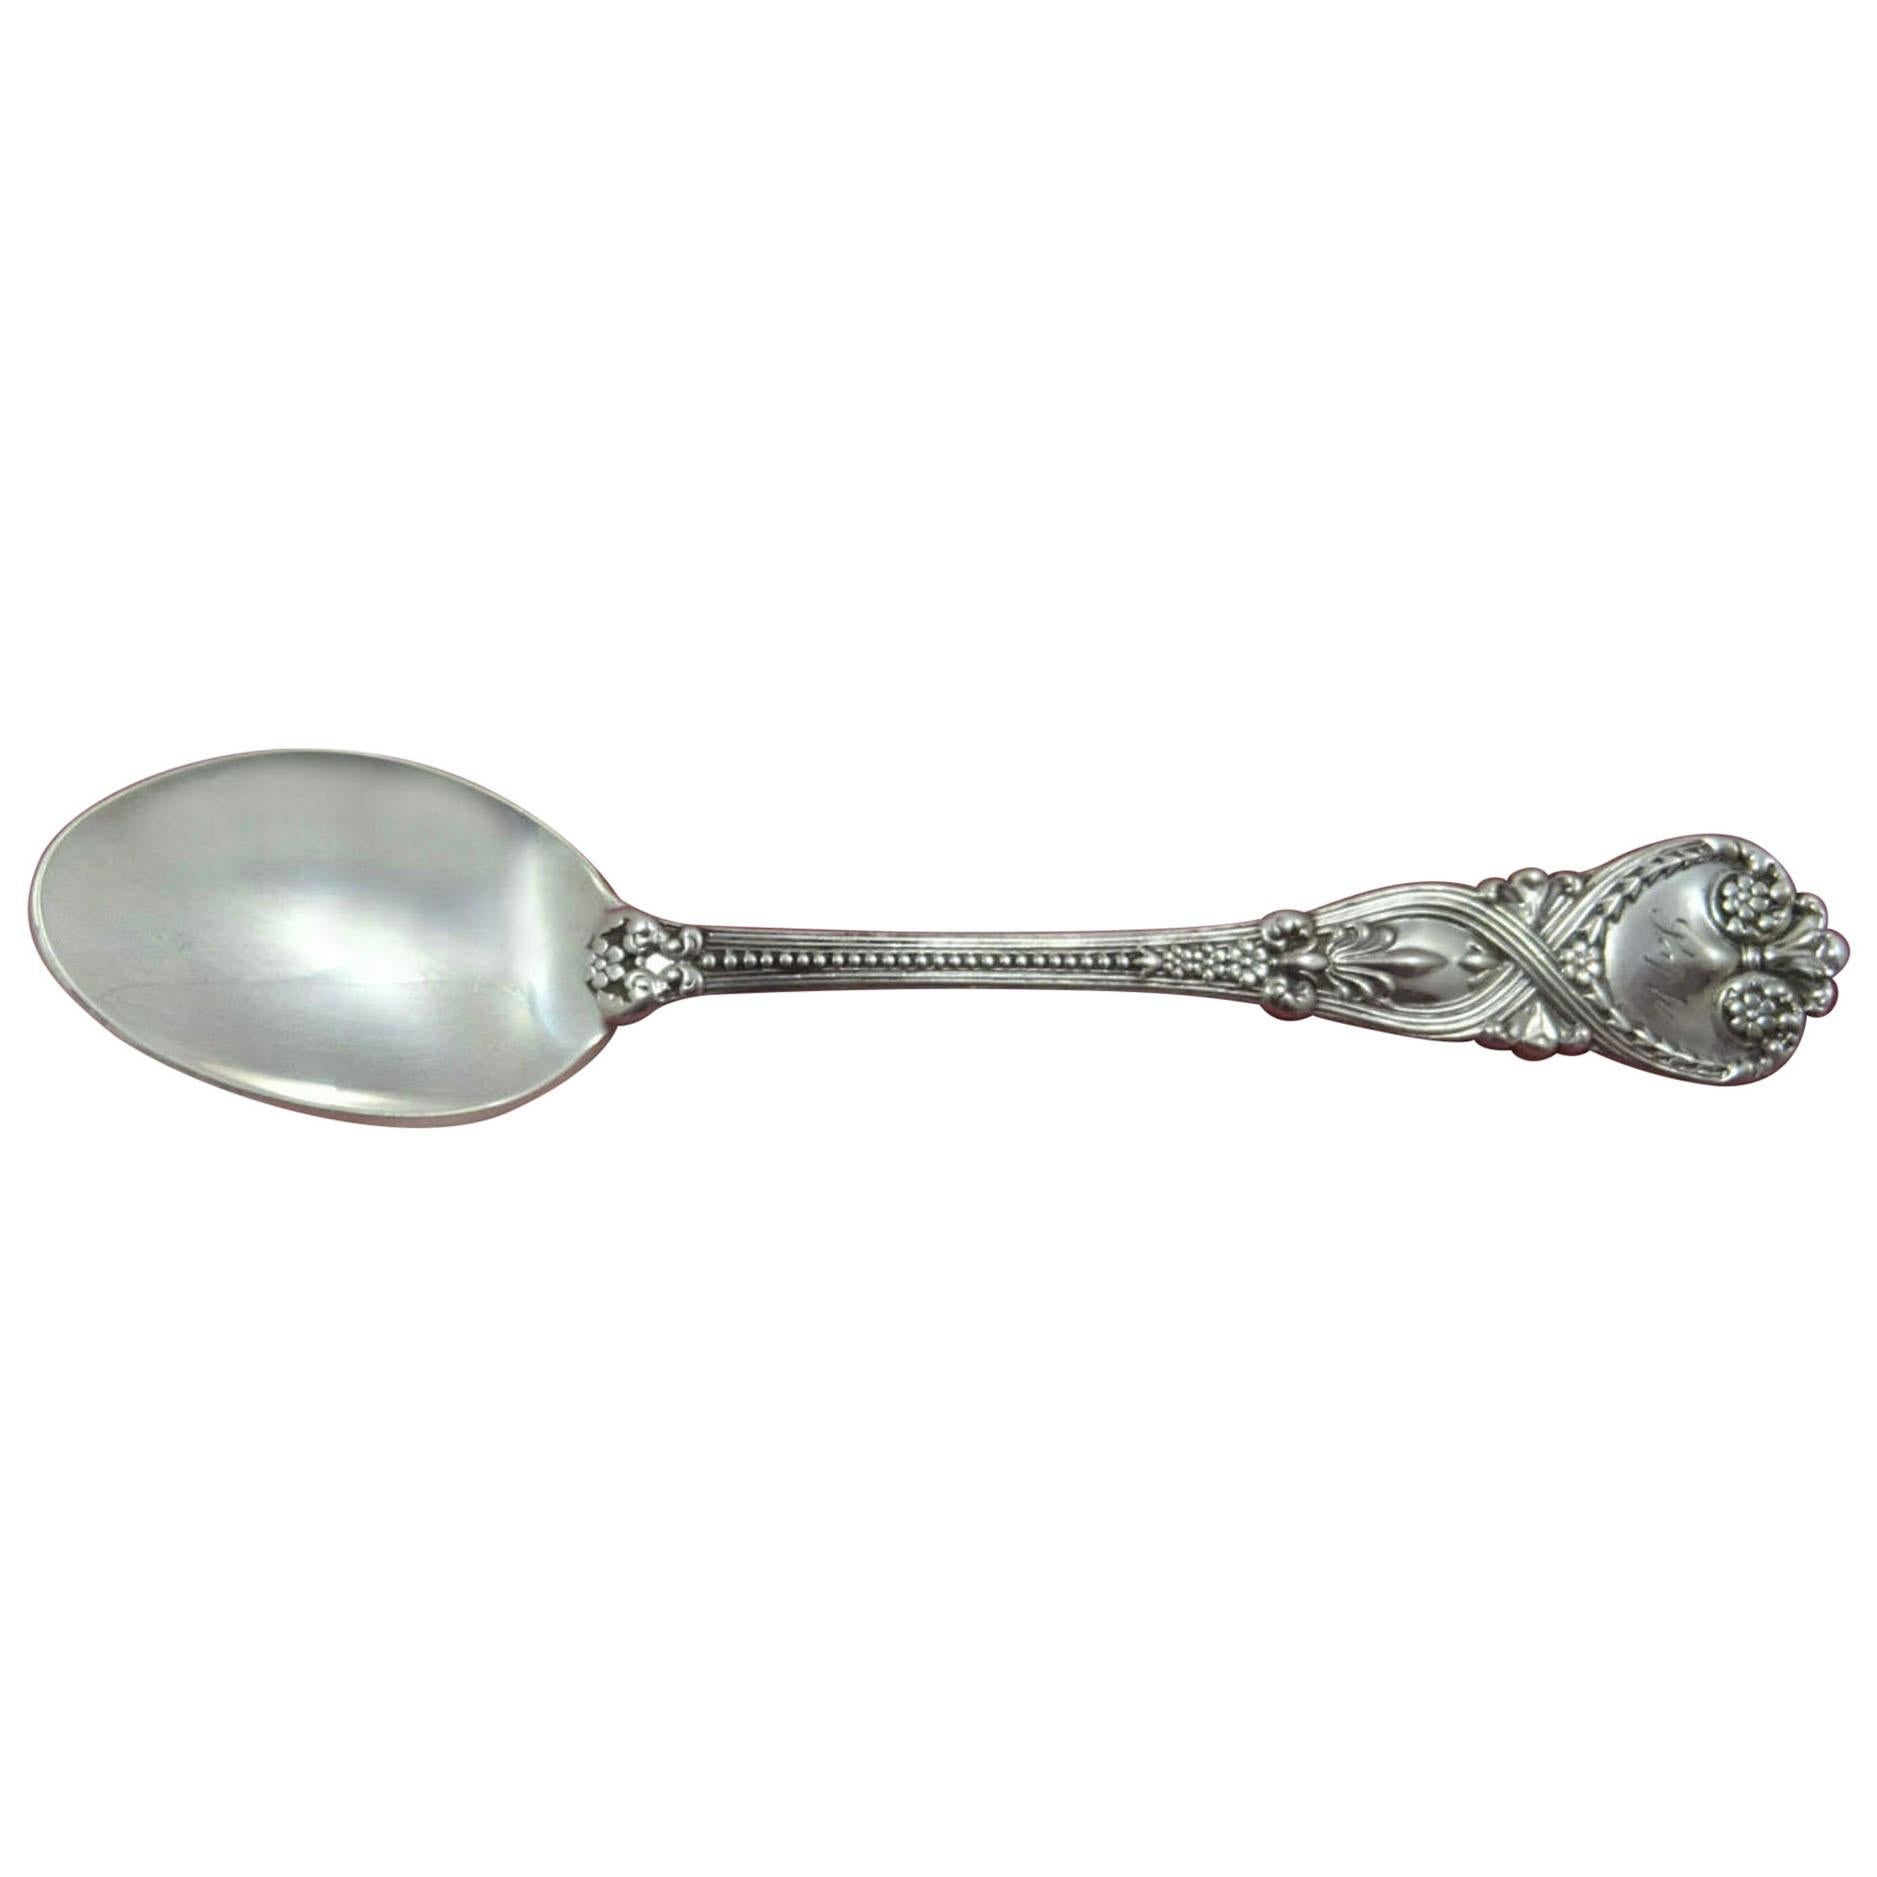 Saint James by Tiffany and Co. Sterling Infant Feeding Spoon Custom